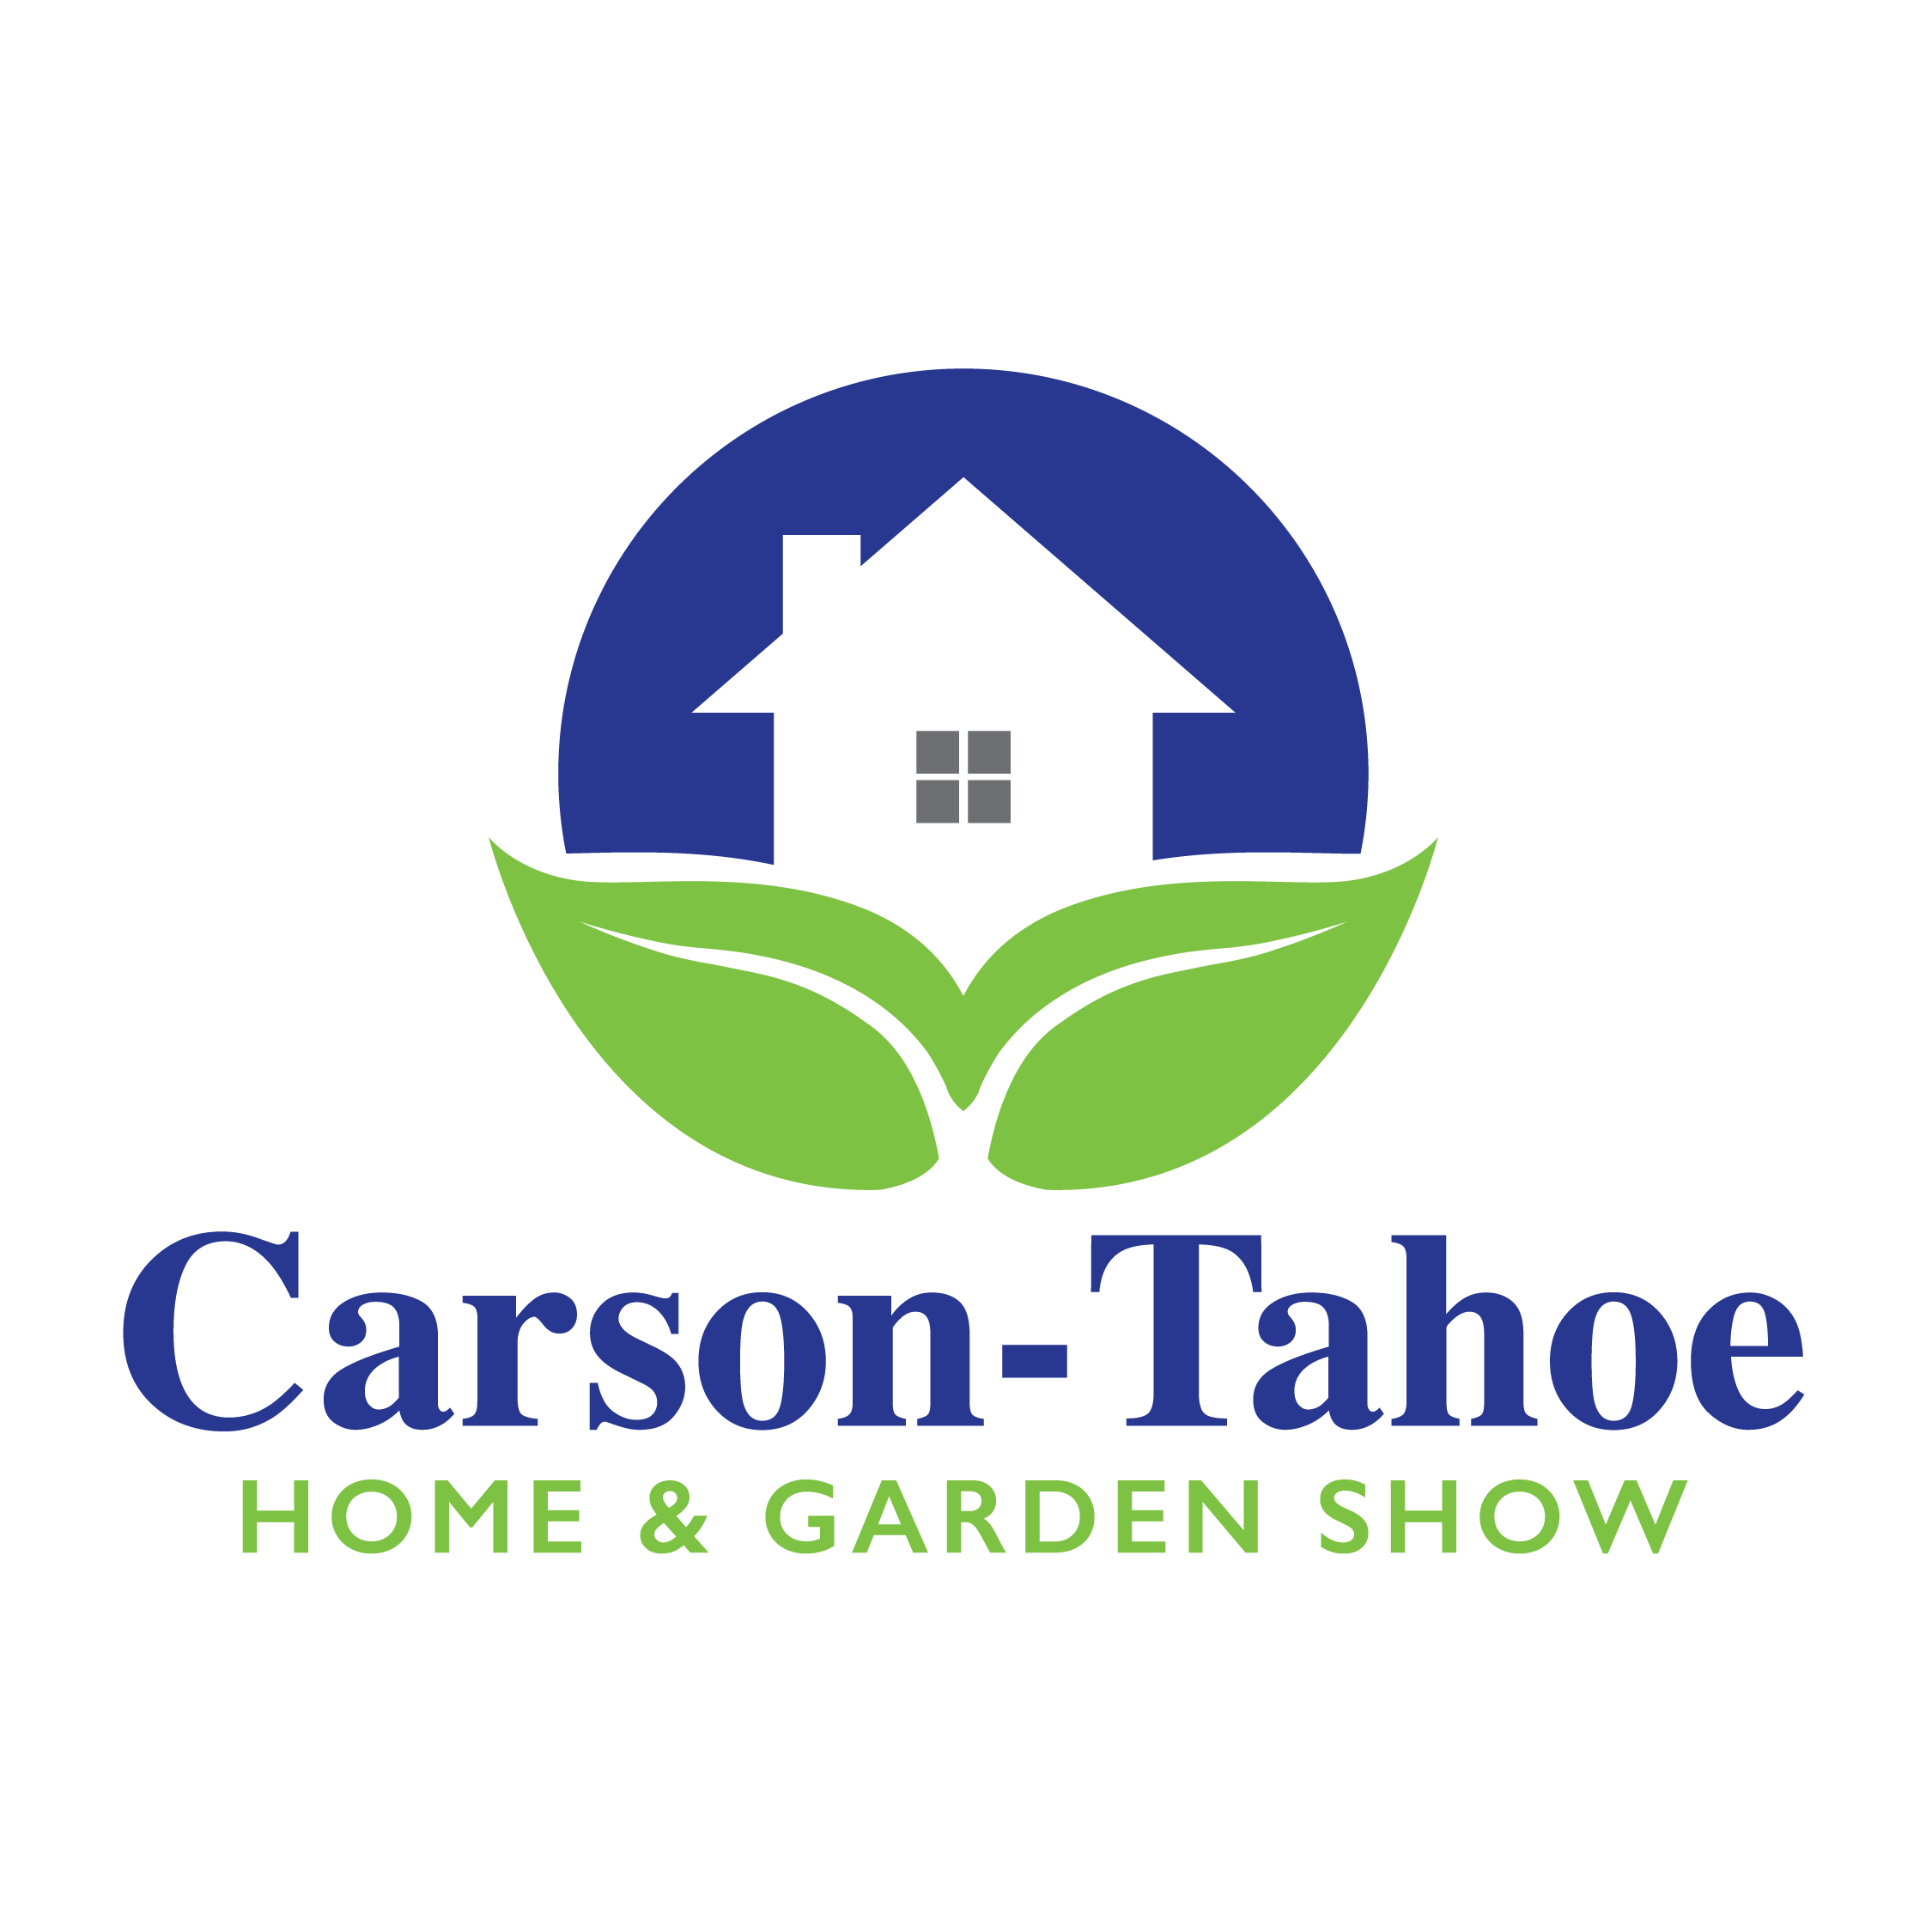 Carson-Tahoe Home & Garden Show this weekend in Carson City